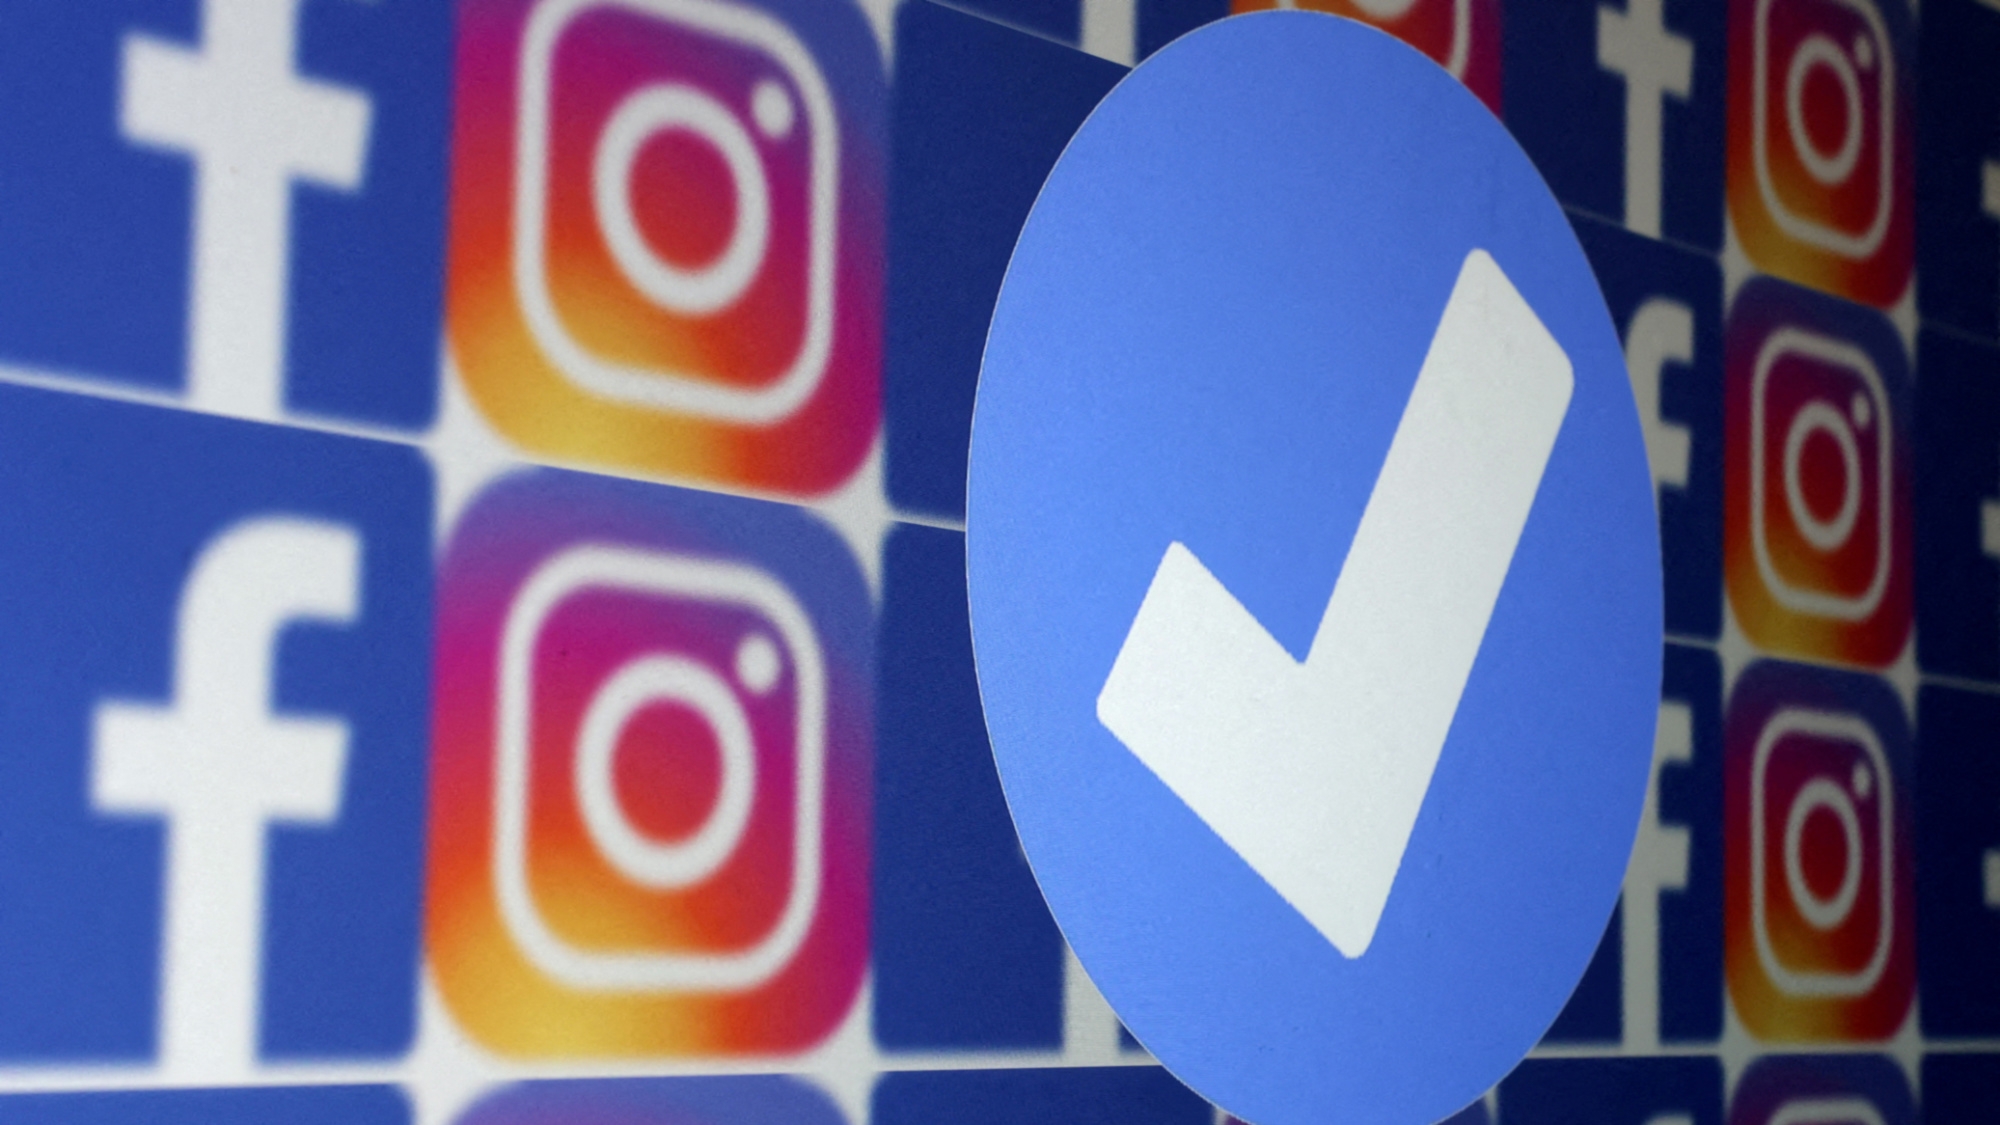 A blue verification badge and the logos of Facebook and Instagram are seen in this picture illustration taken 19 January 2023 (Reuters/Dado Ruvic)